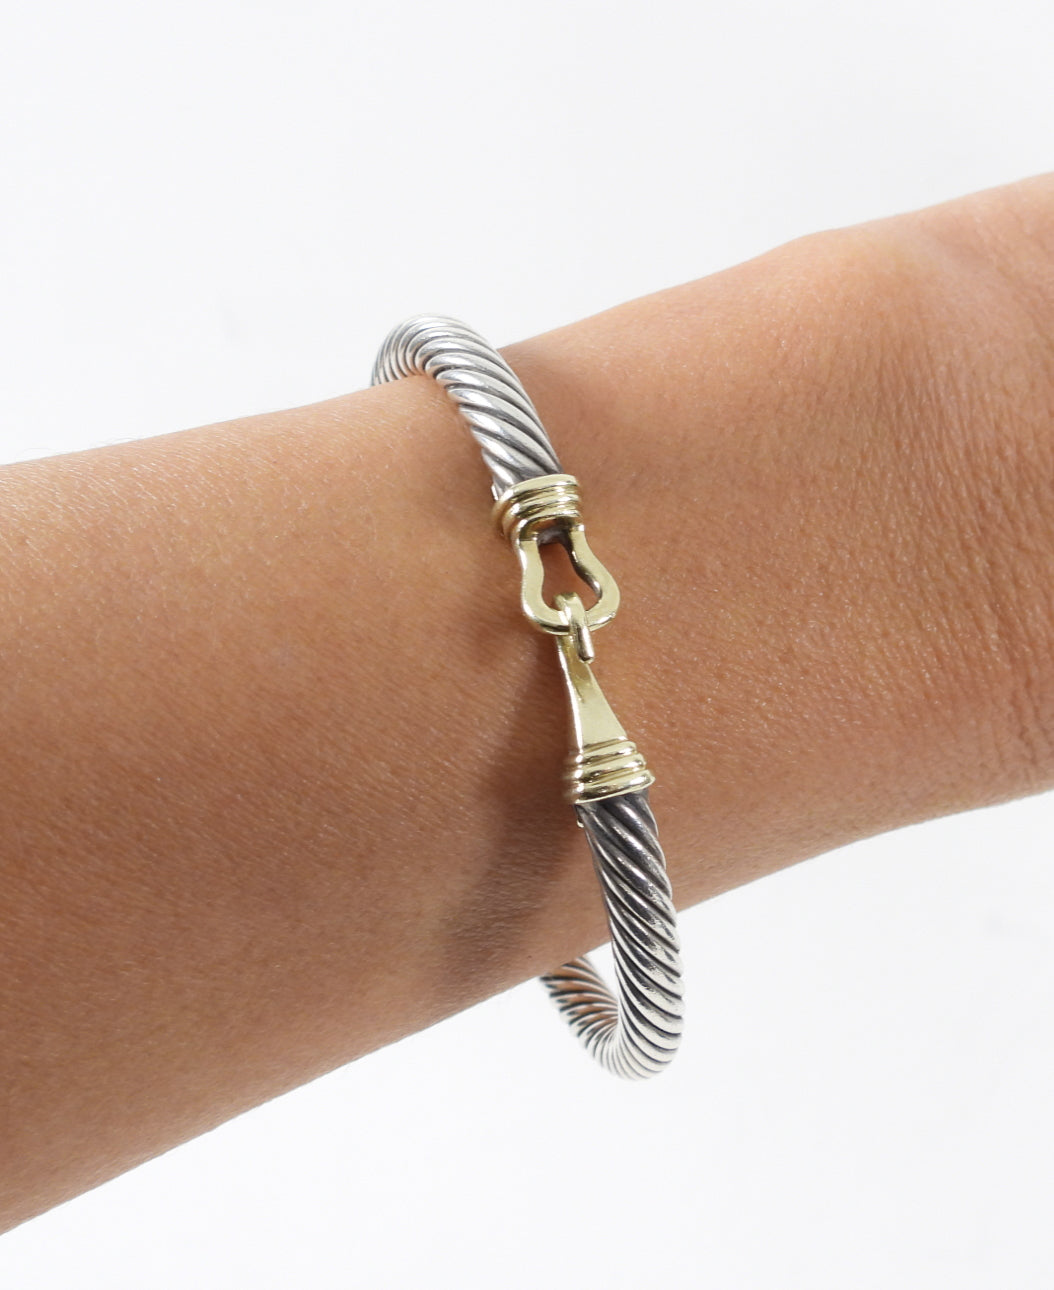 The Perfect Fit Sizing David Yurman Cable Bracelets  Academy by  FASHIONPHILE